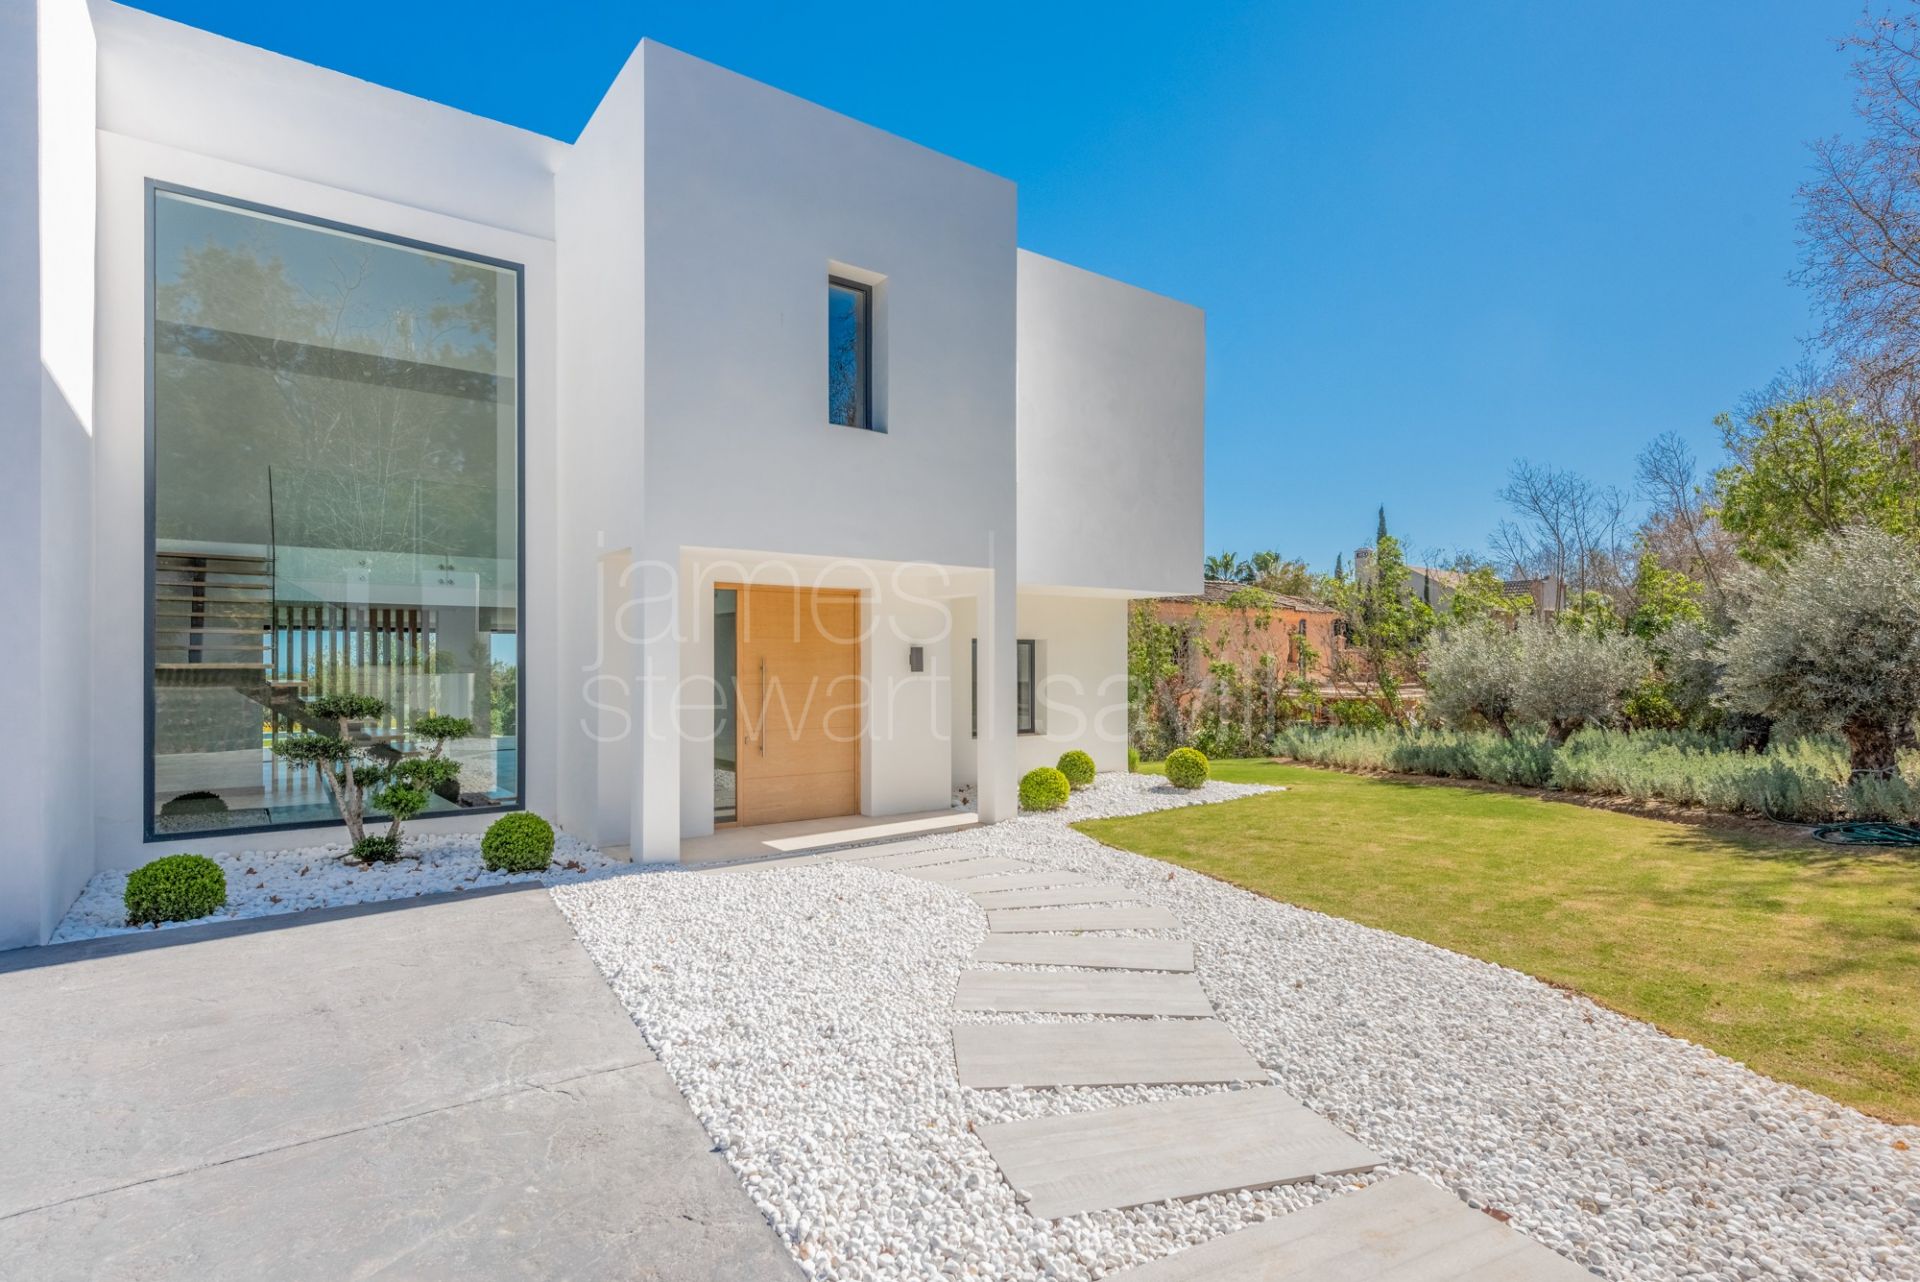 Spectacular modern style east facing villa with fabulous mountain and sea views.